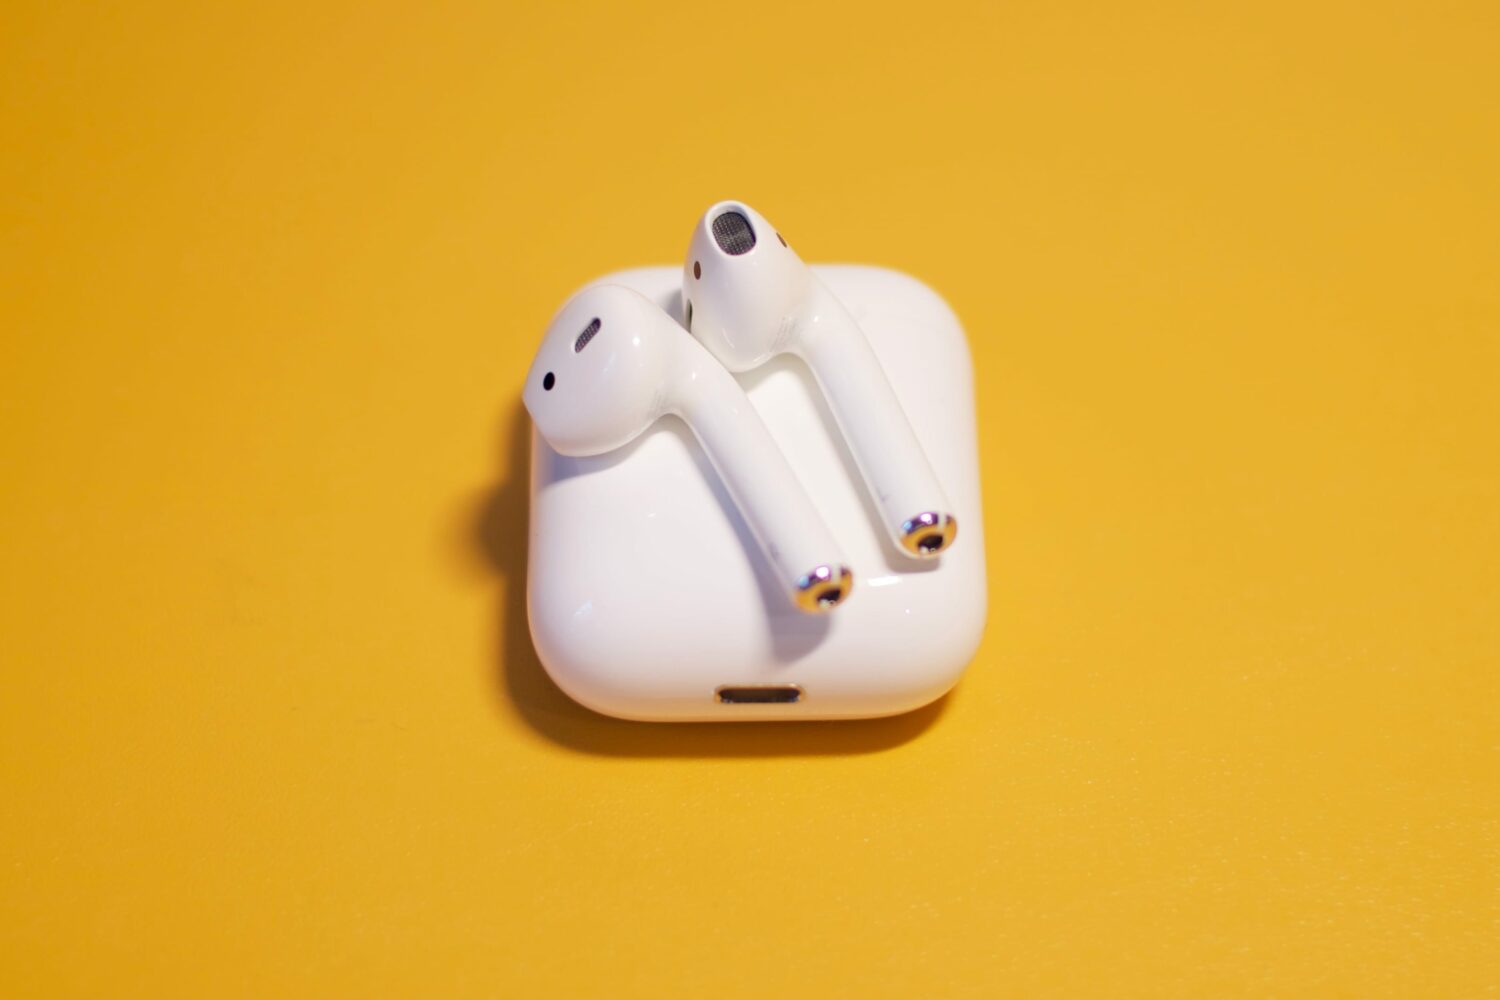 Apple AirPods resting on their charging case, set against a yellow solid background